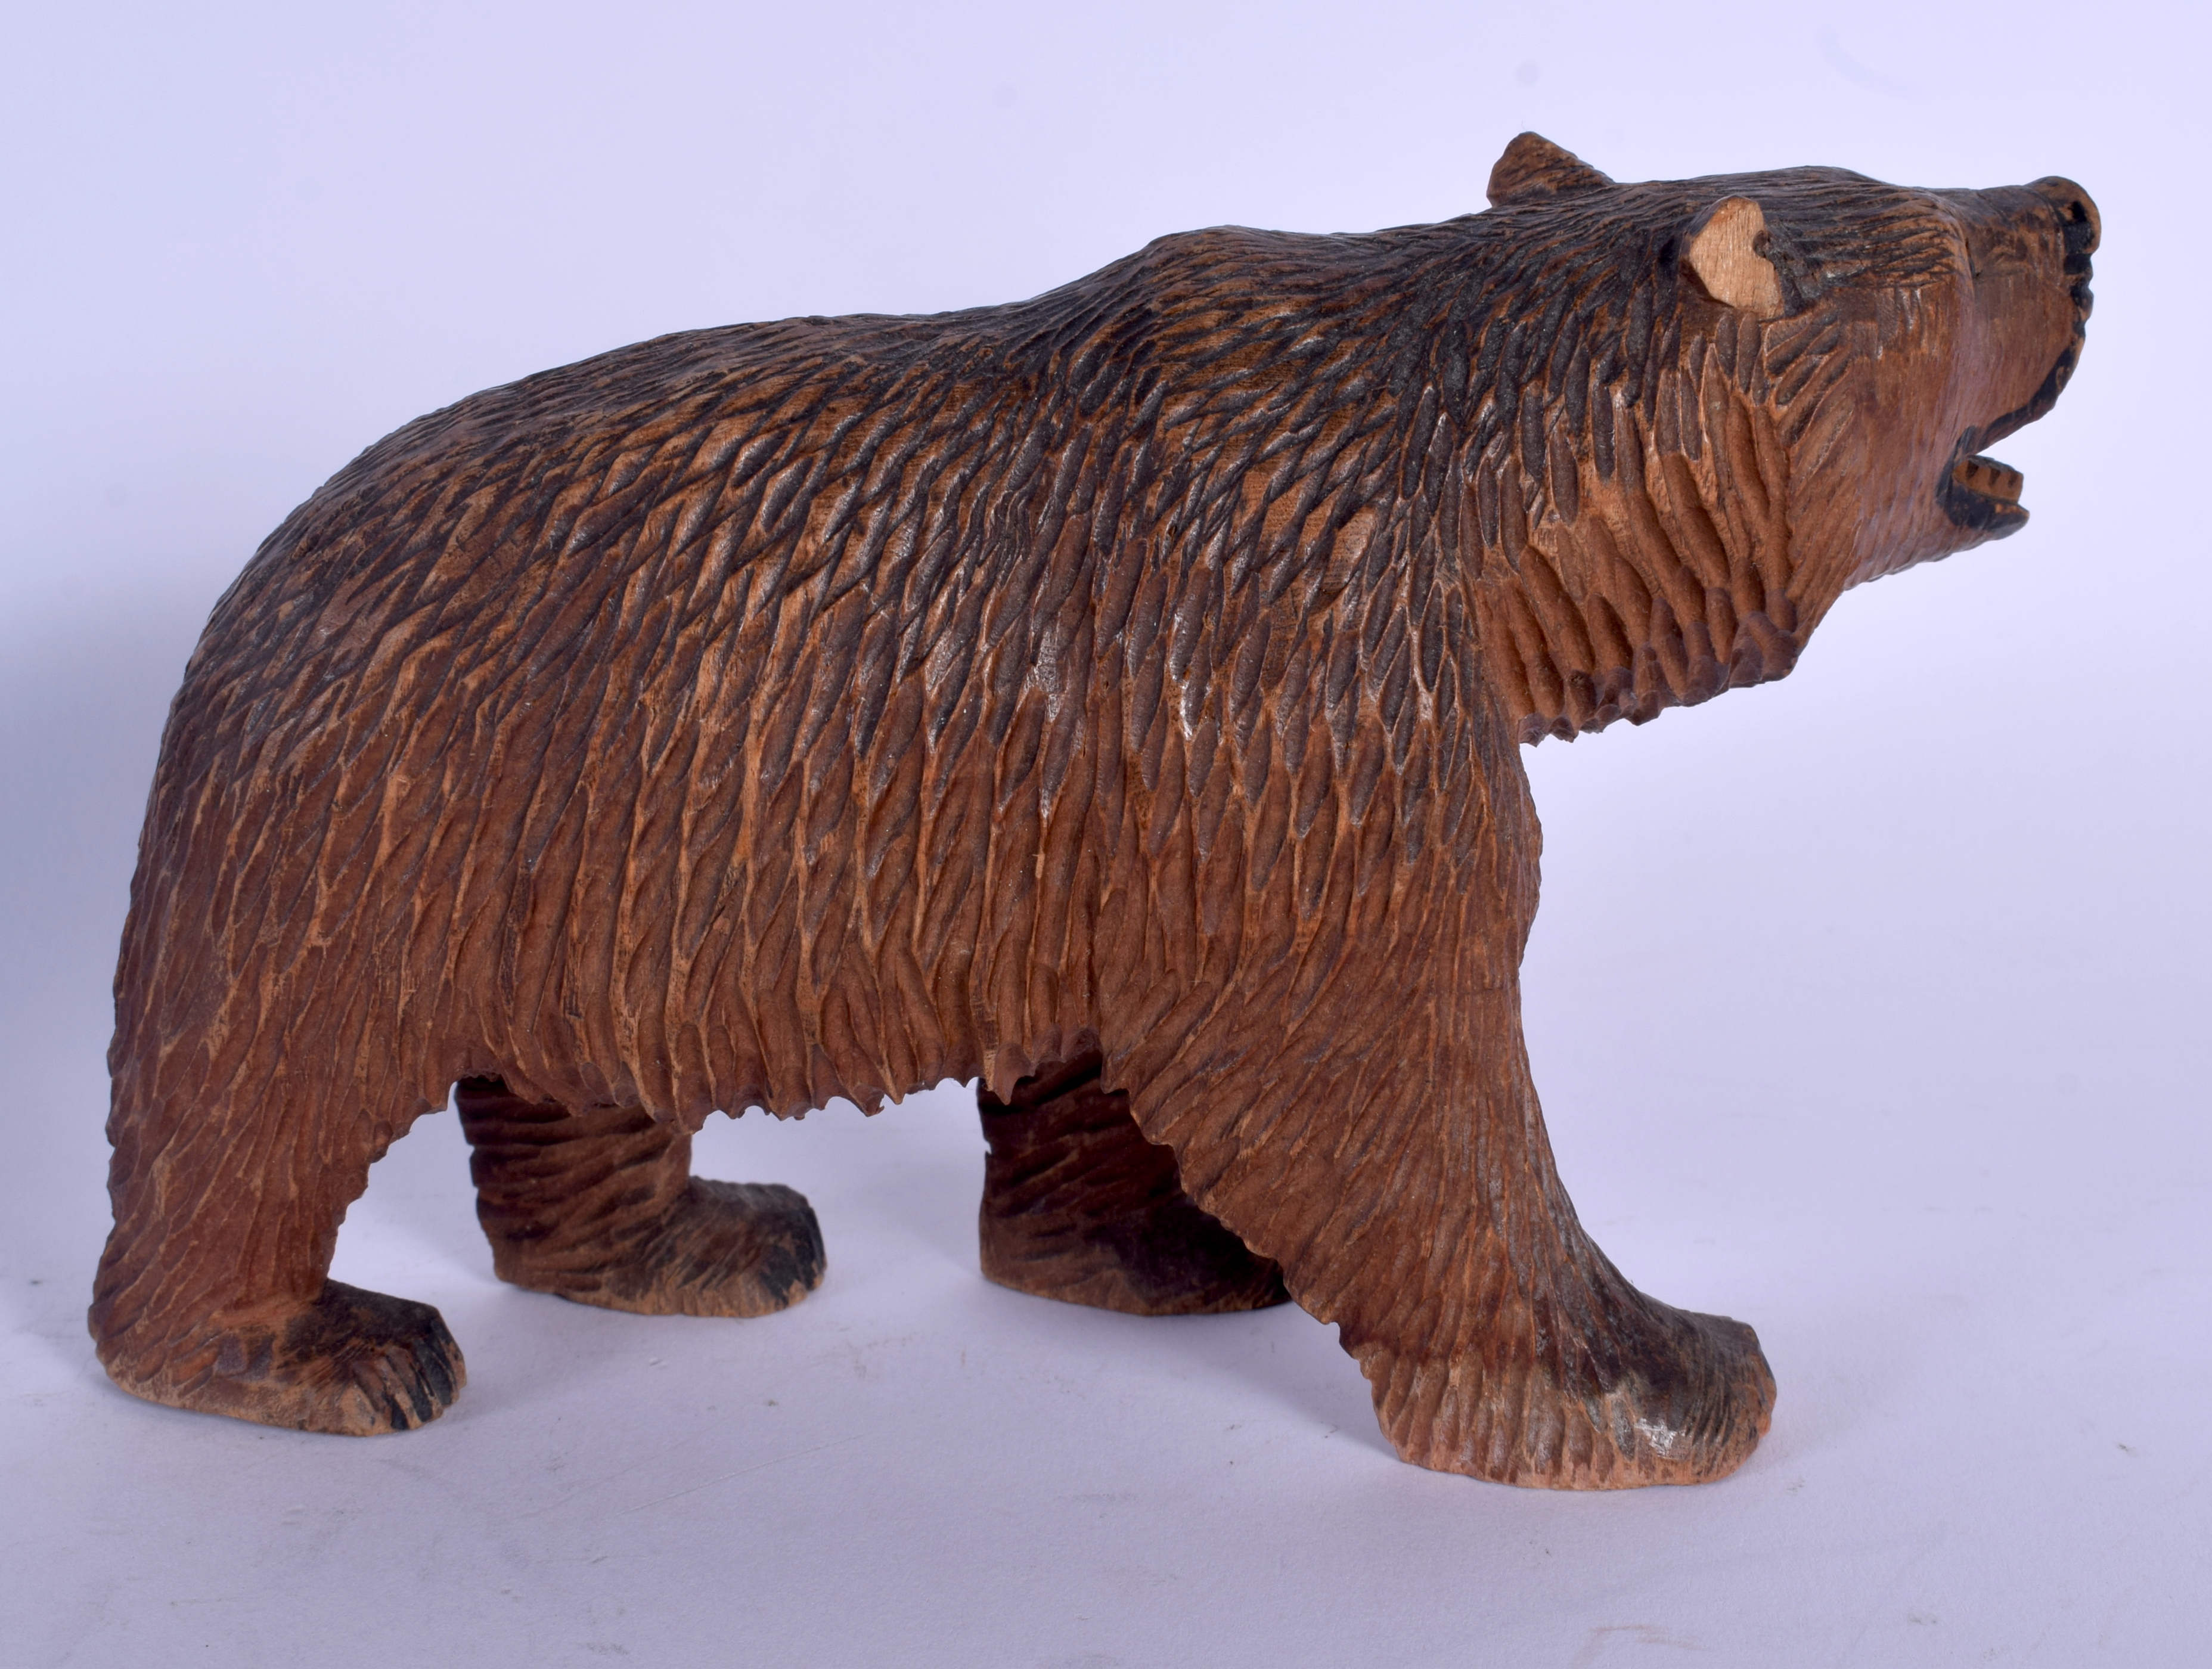 A BAVARIAN BLACK FOREST CARVED WOOD FIGURE OF A BEAR. 14 cm x 11 cm. - Image 2 of 3